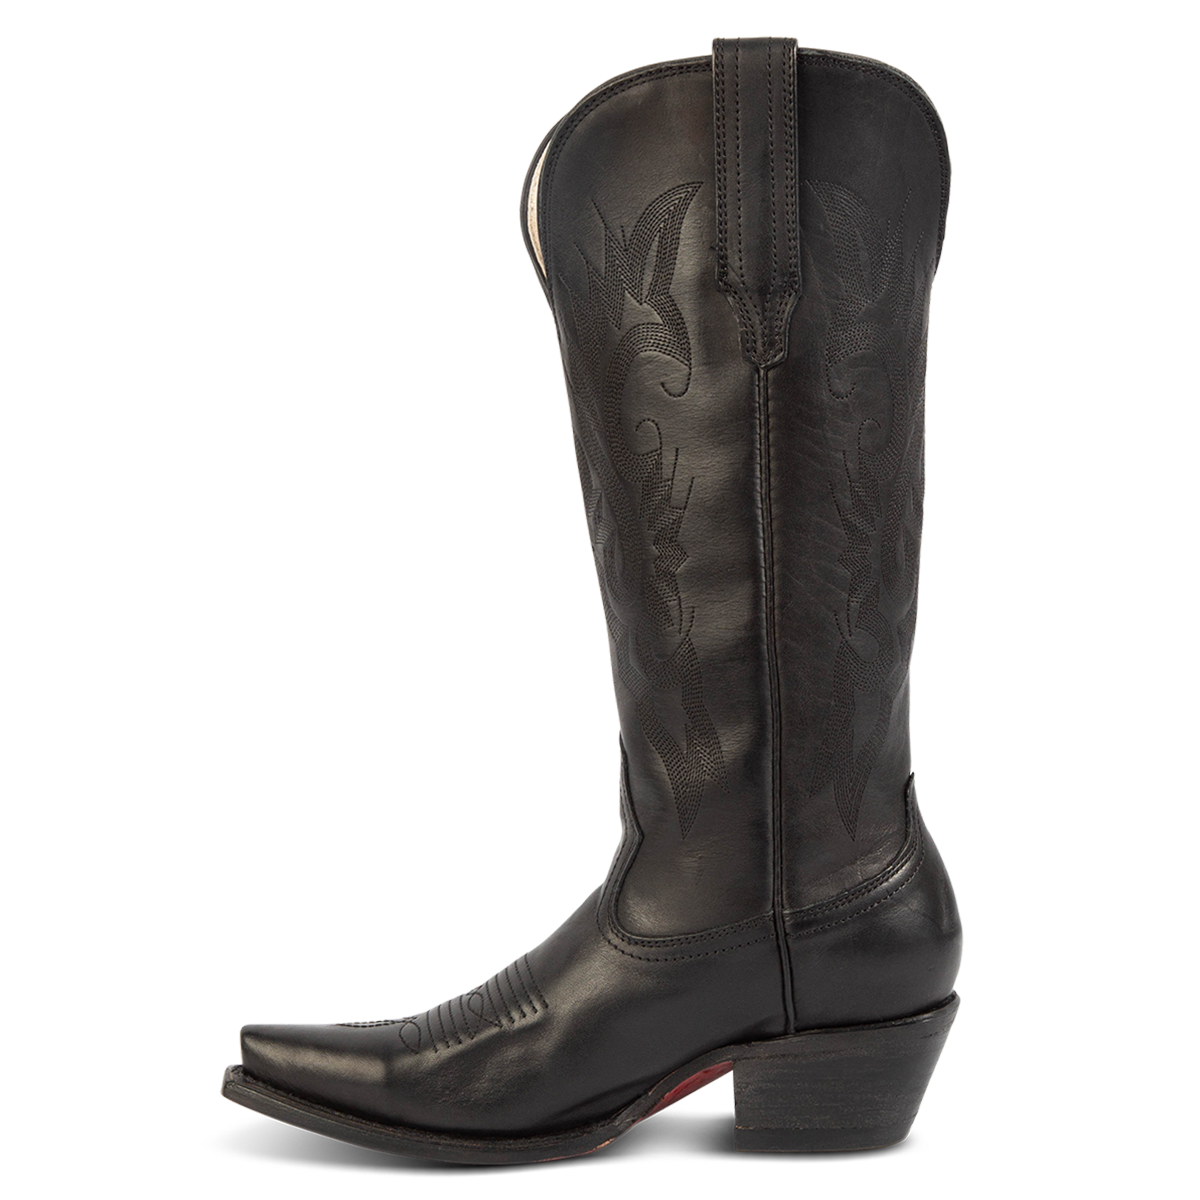 Side view showing leather pull straps and western stitch detailing on FREEBIRD women's Woodland black leather boot